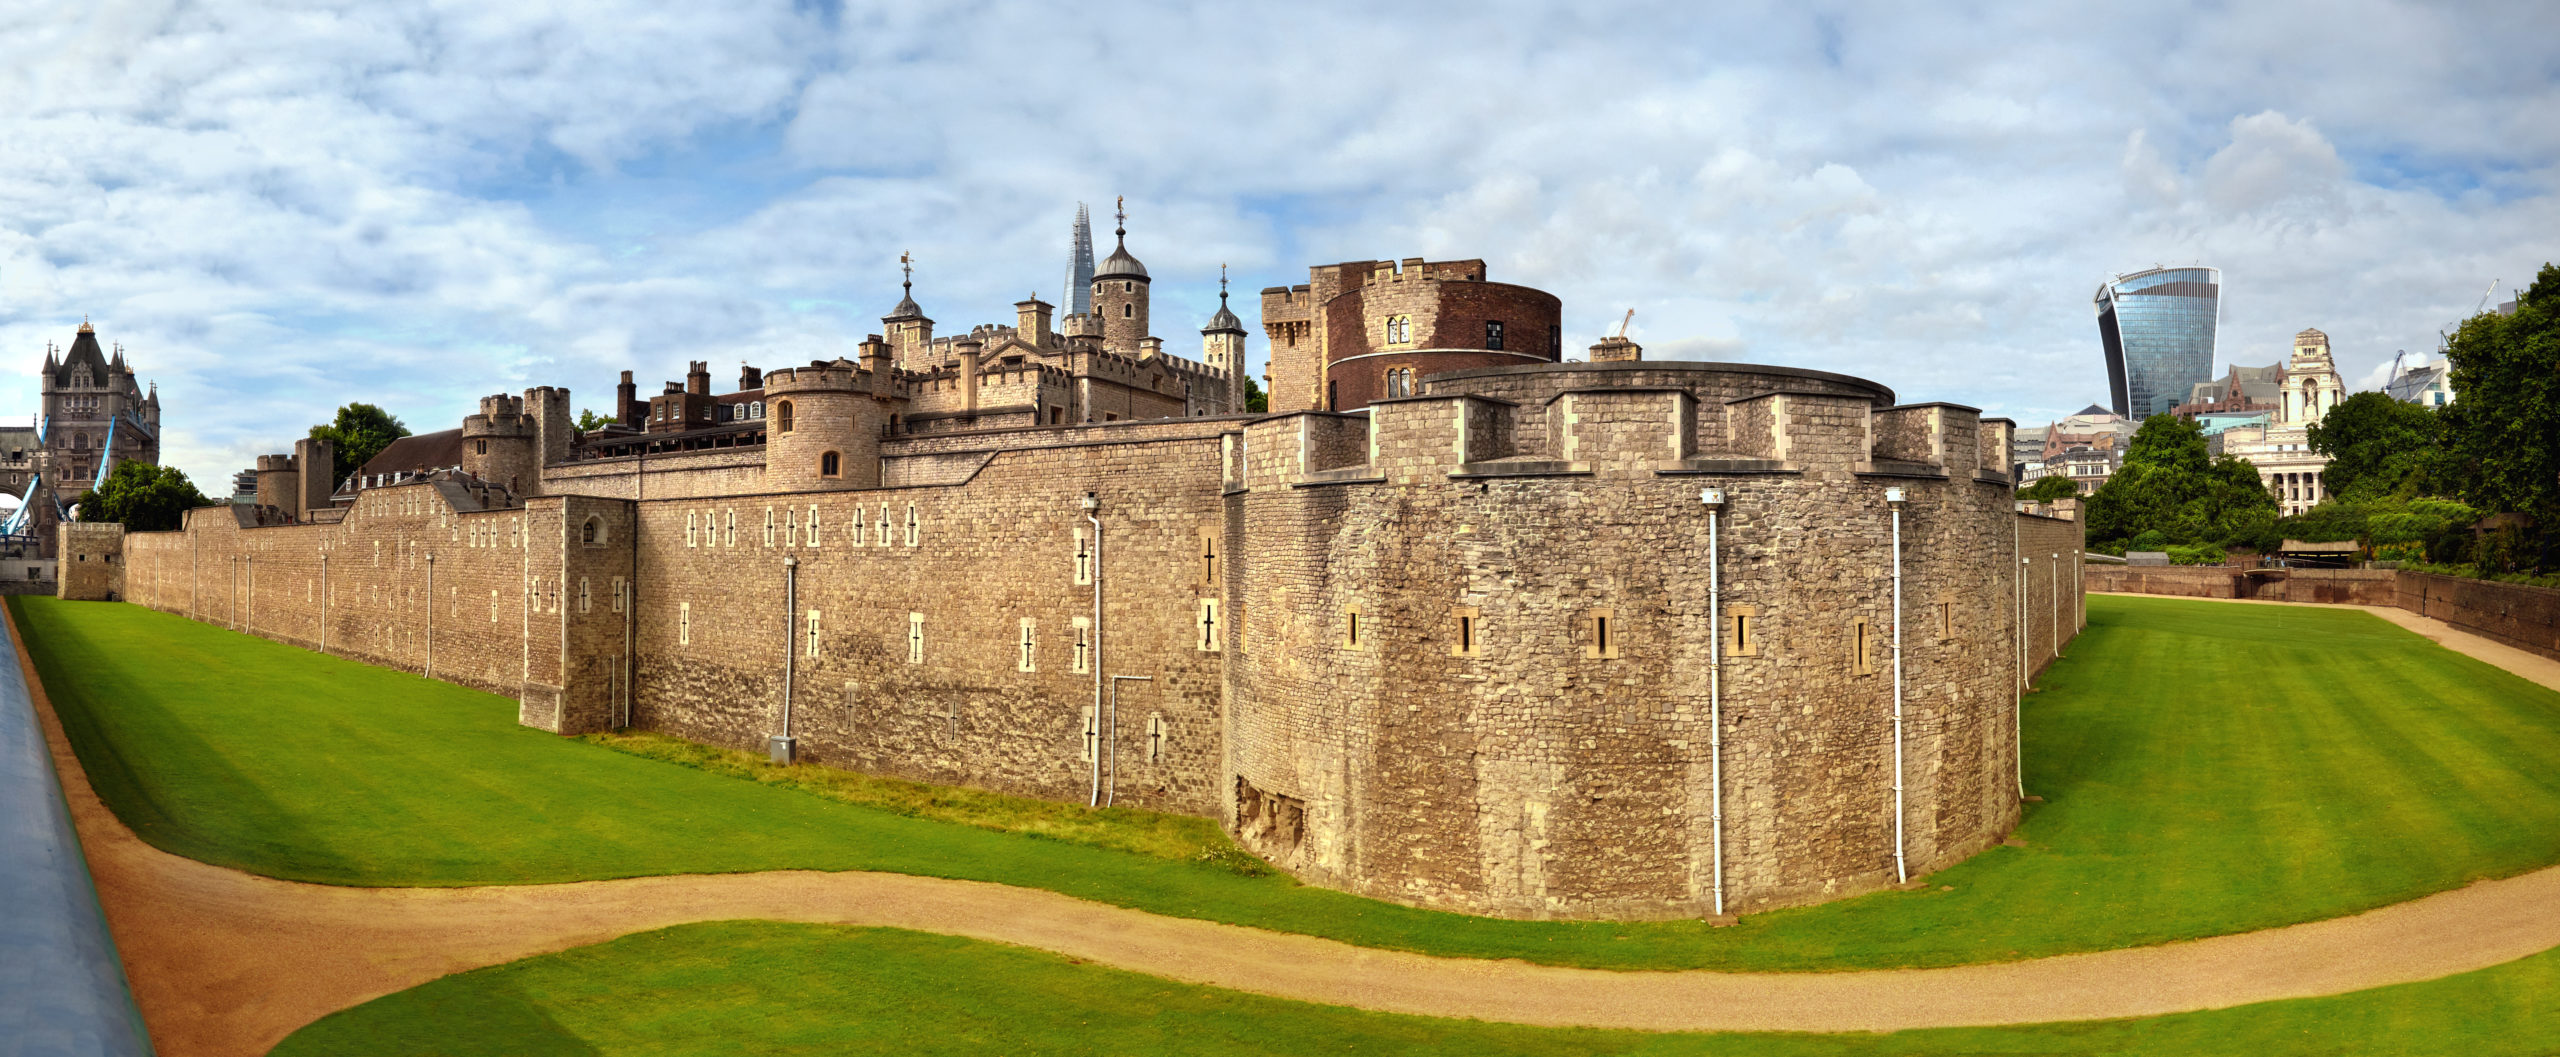 Panoramic image of Tower of London with dry moat and outer curtain wall in London, England, UK